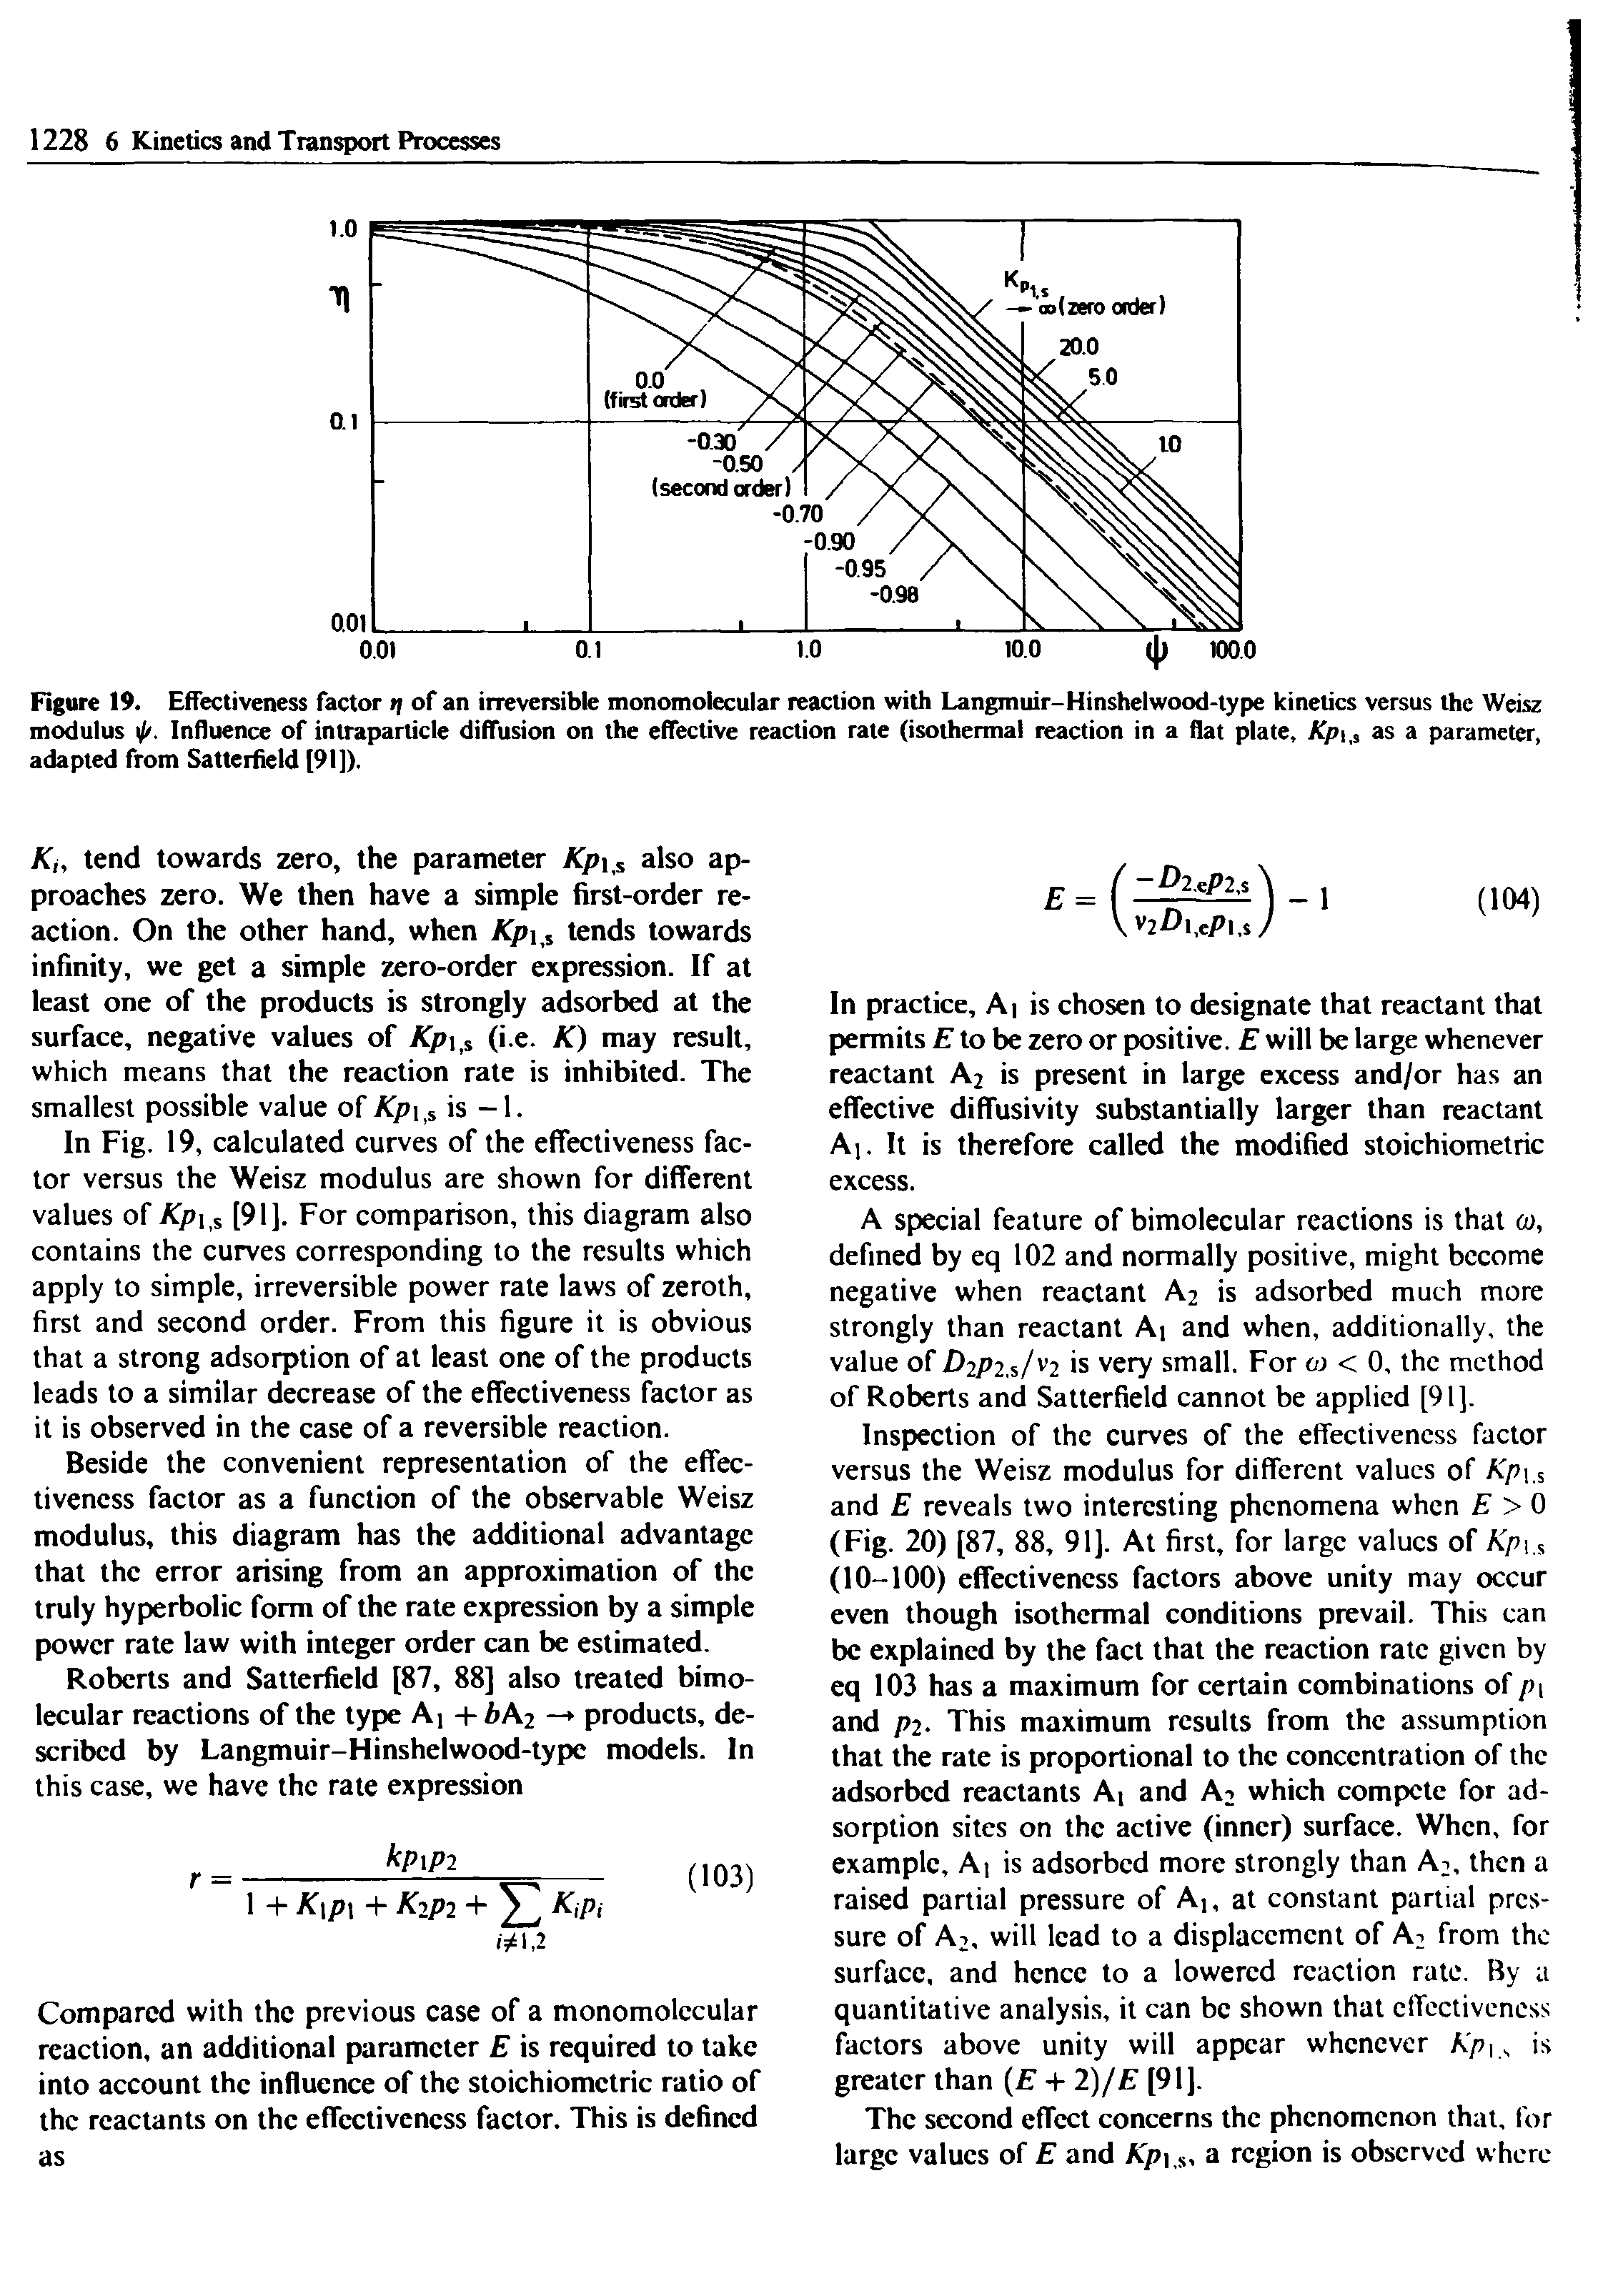 Figure 19. Effectiveness factor ij of an irreversible monomolecular reaction with Langmuir-Hinshelwood-type kinetics versus the Weisz modulus 4>. Influence of intraparticle diffusion on the effective reaction rate (isothermal reaction in a flat plate, X/>iiS as a parameter, adapted from Satterfield [91]).